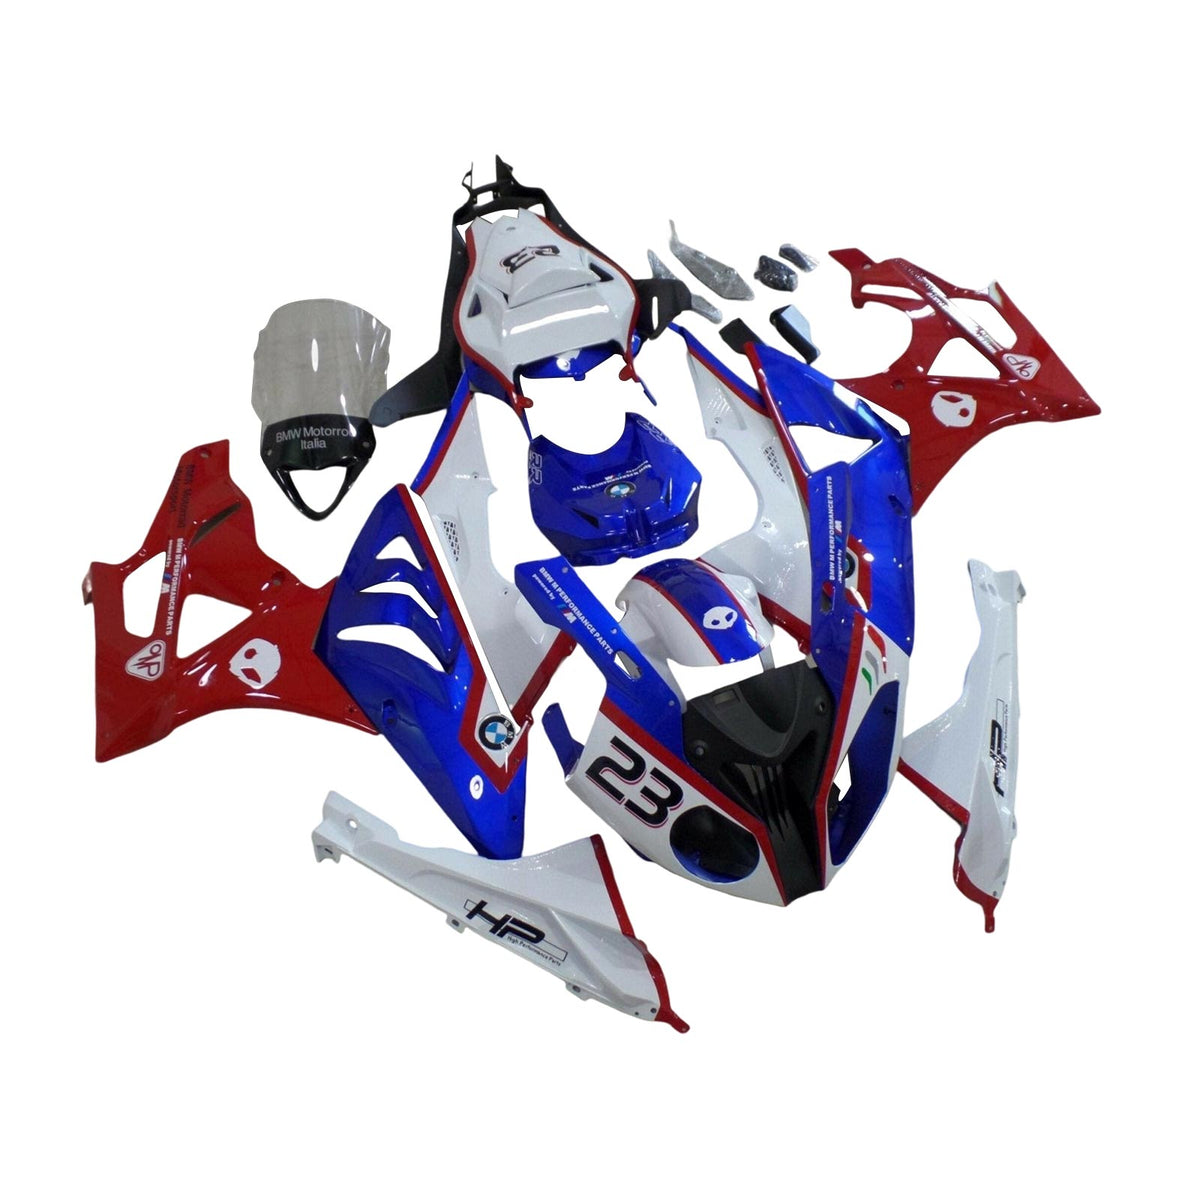 Amotopart BMW S1000RR 2015-2016 Blue&Red Style3 Fairing Kit